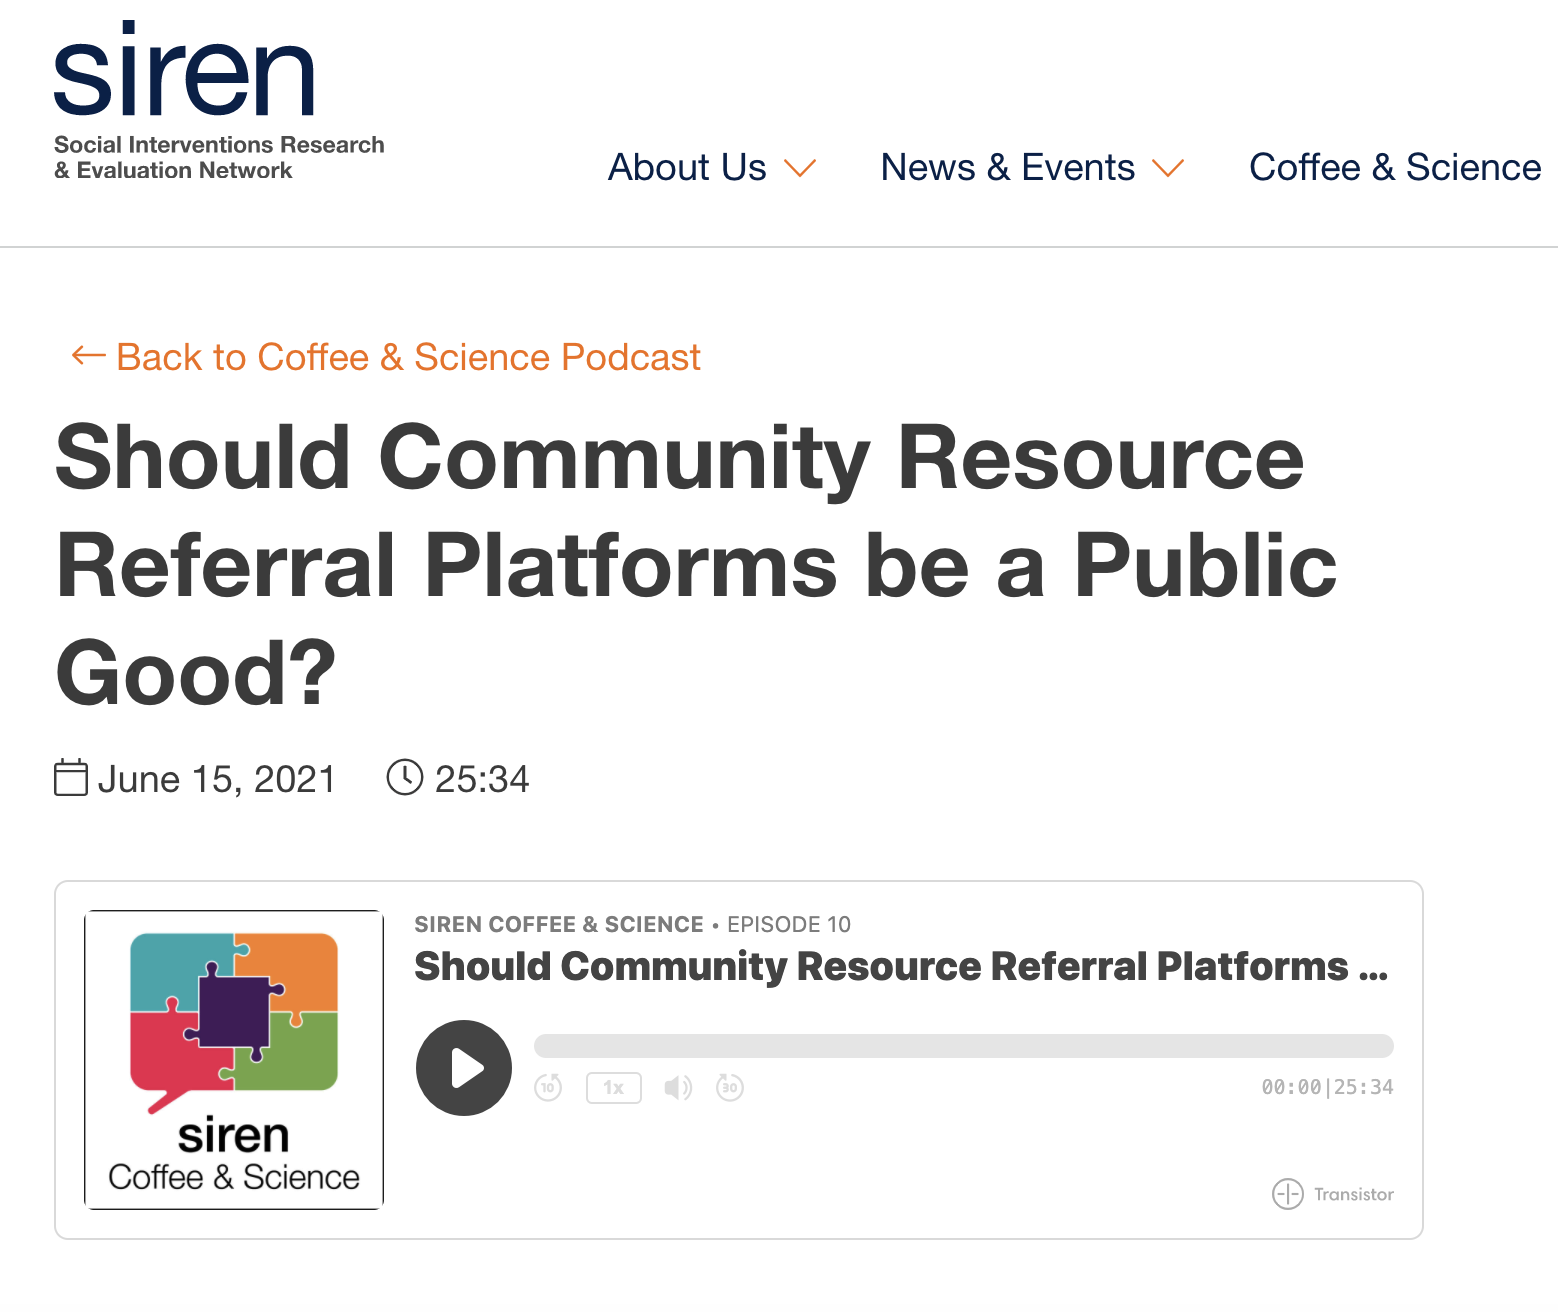 Should Community Resource Referral Platforms be a Public Good?